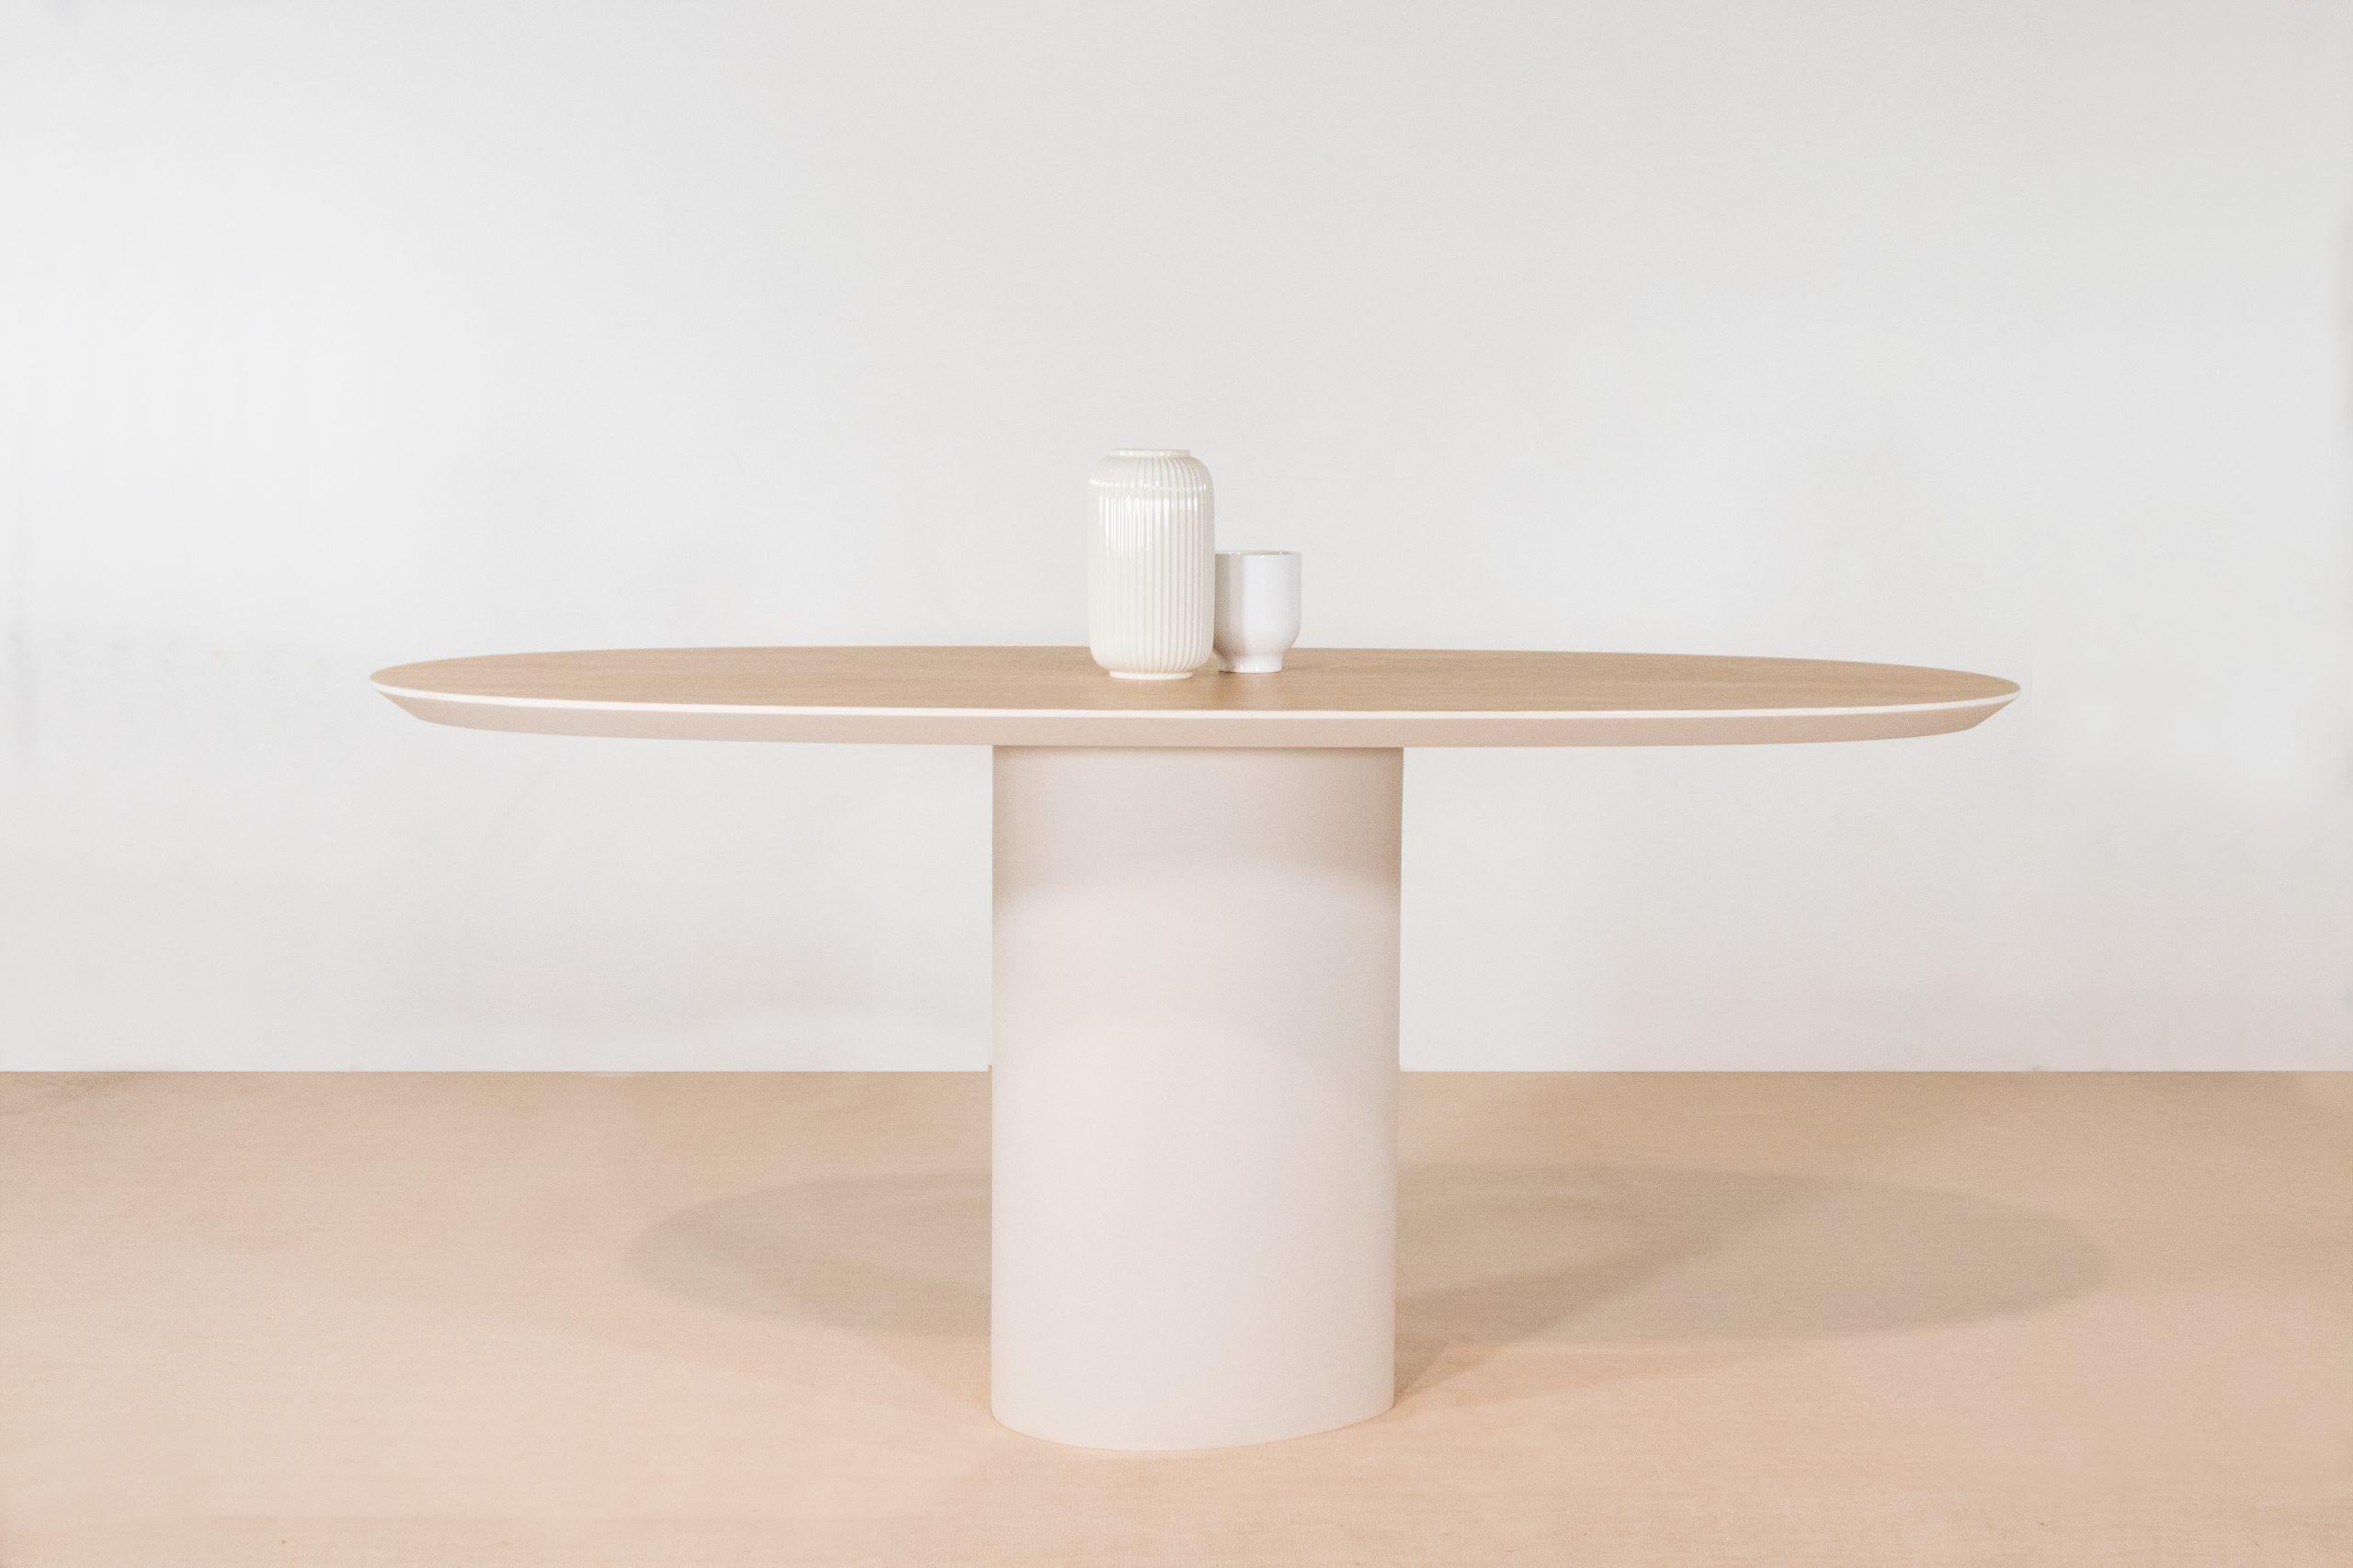 Handmade Eve table Signed by Gigi Design
Dimensions: L 160 x D 75 x H 74 cm
Materials: Top of the table in natural oak, side of the table and legs in off-white lacquer, with mother-of-pearl and sand integration.

The Eve table is a custom-made